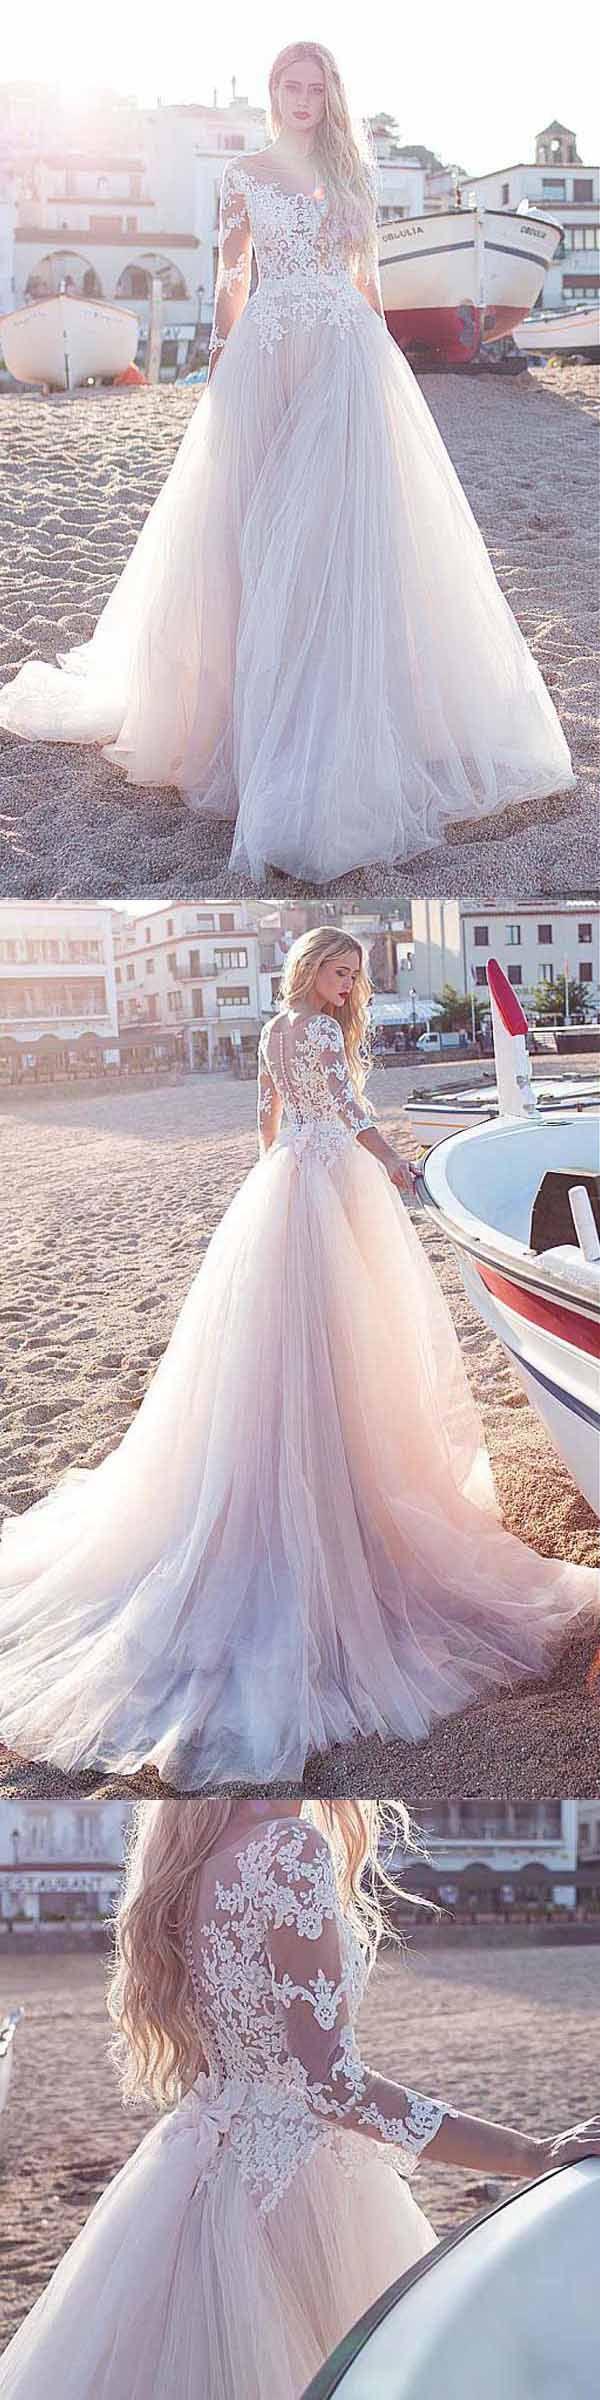 Wedding - Tulle Scoop Neckline A-line Wedding Dress With Lace Appliques WD188